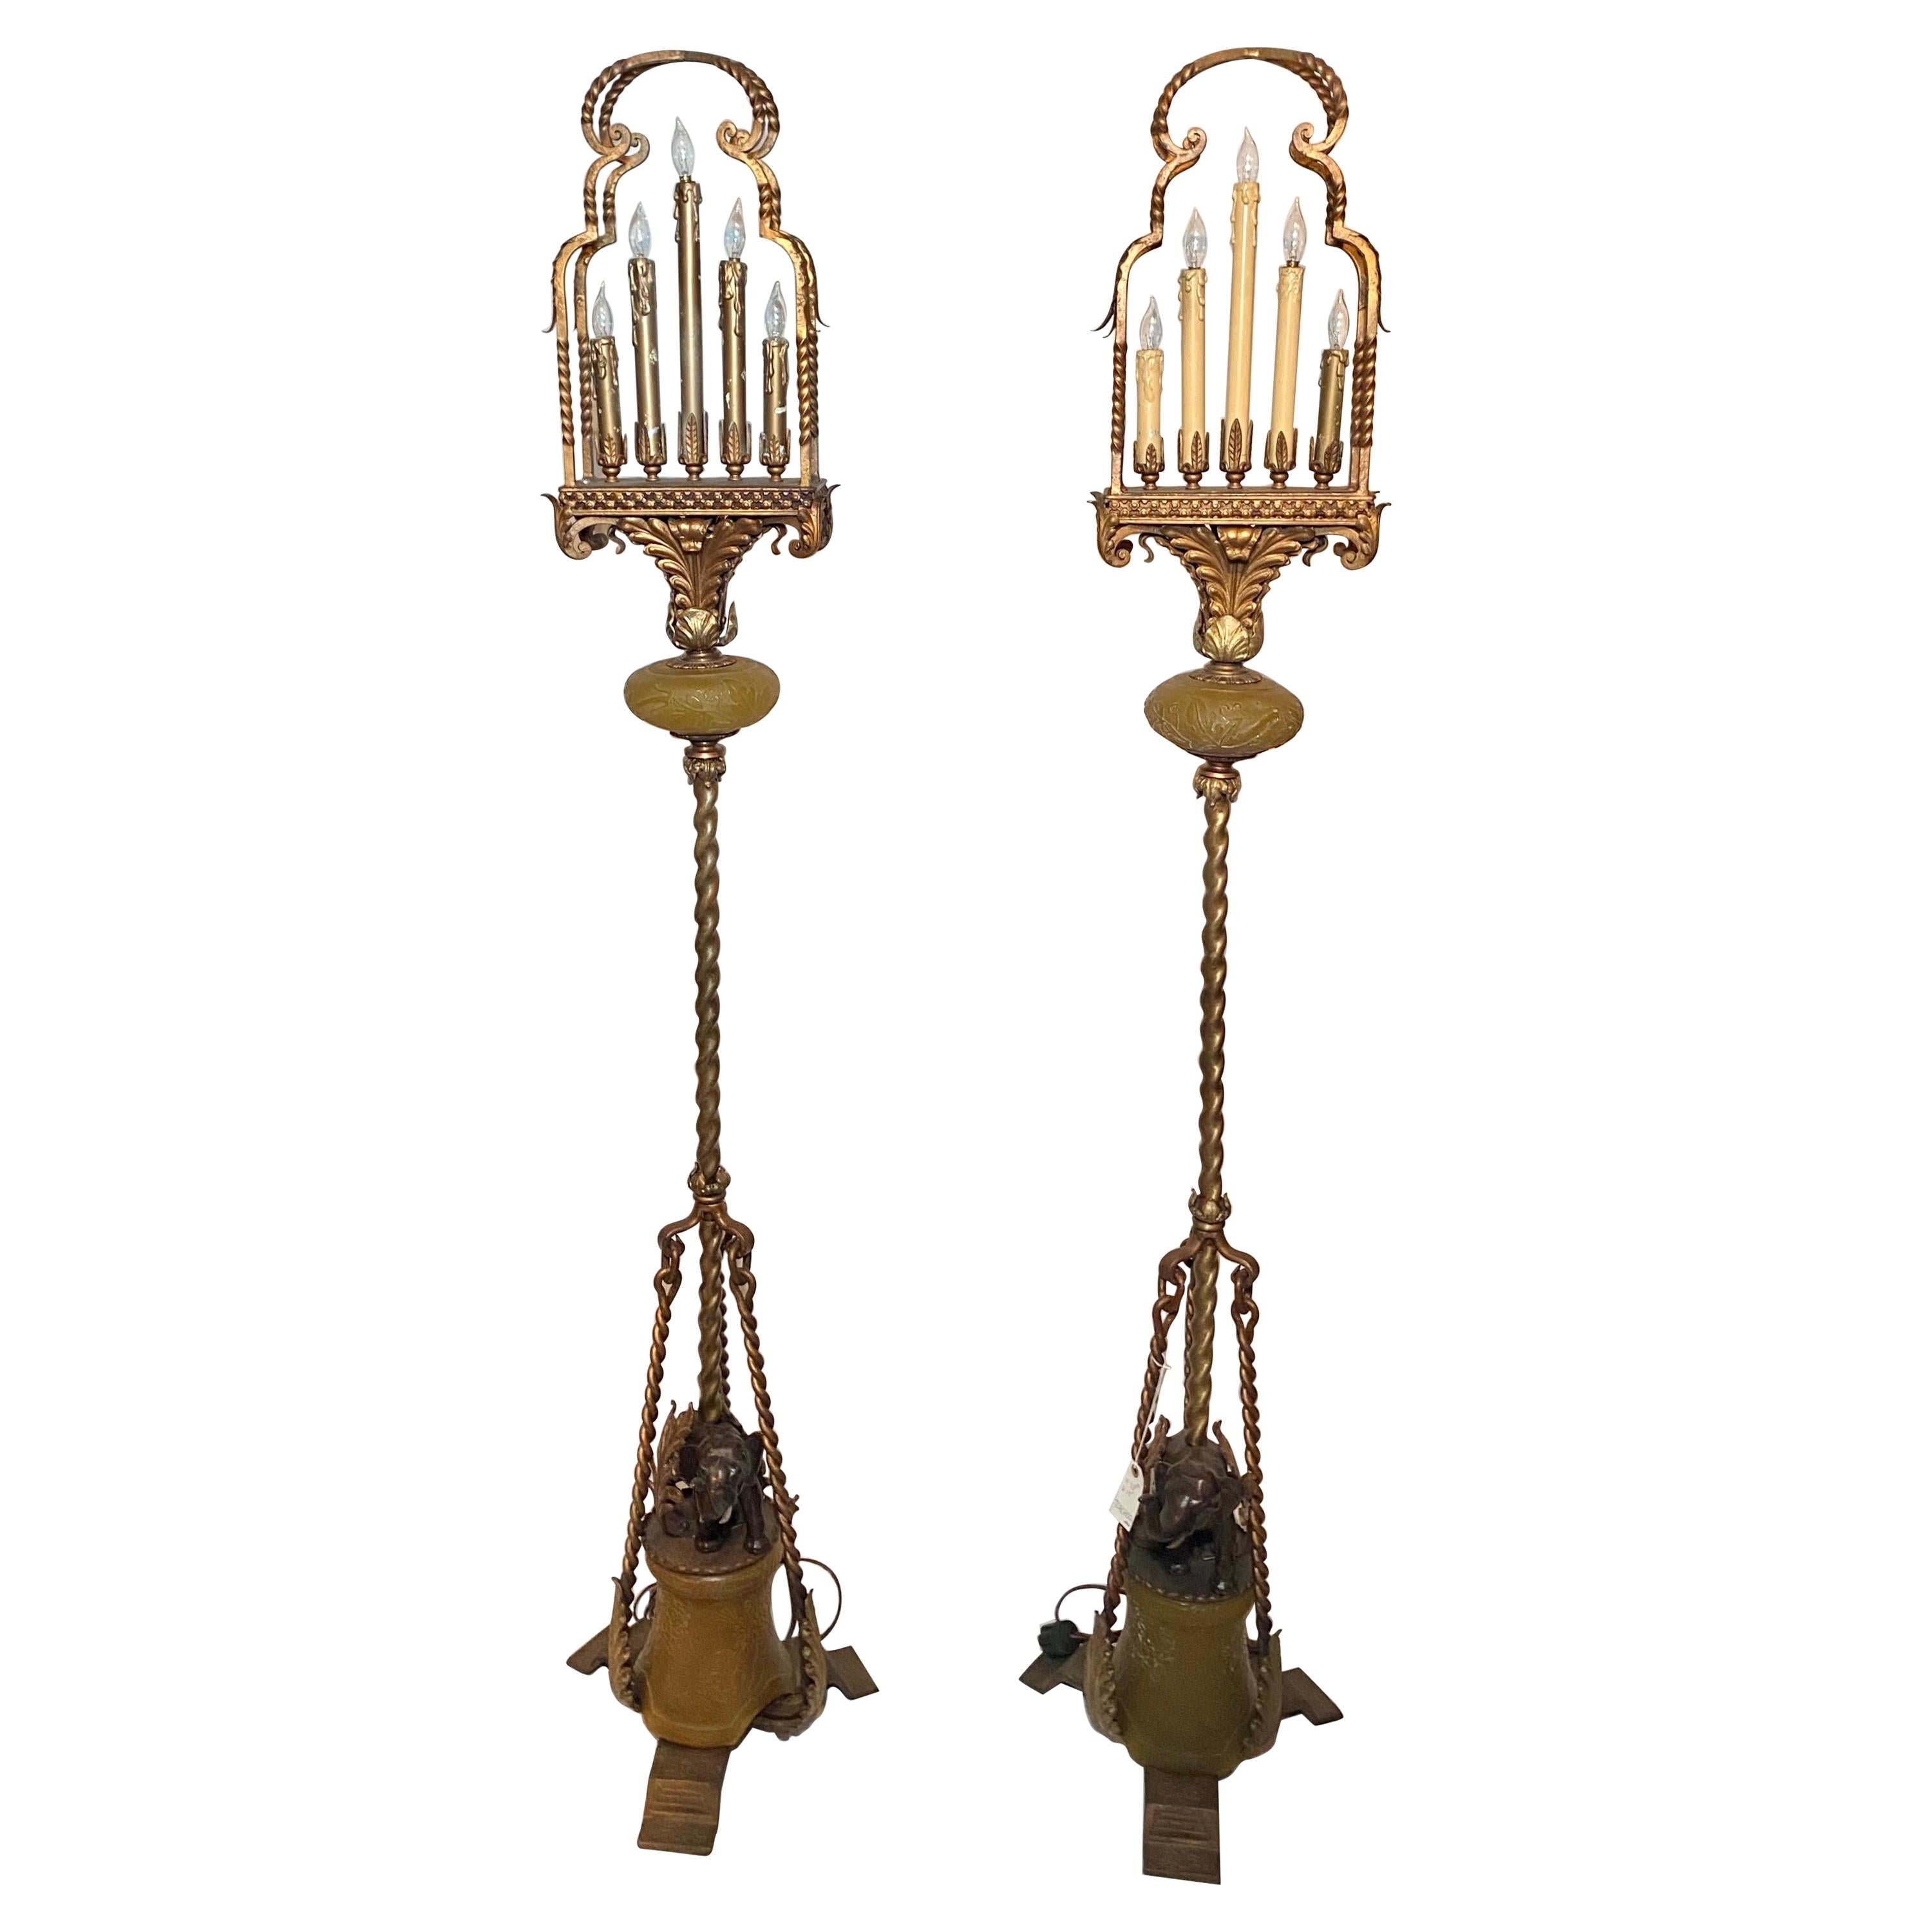 Pair Antique Iron Torchères with Bronze Elephants at Base, Circa 1920's